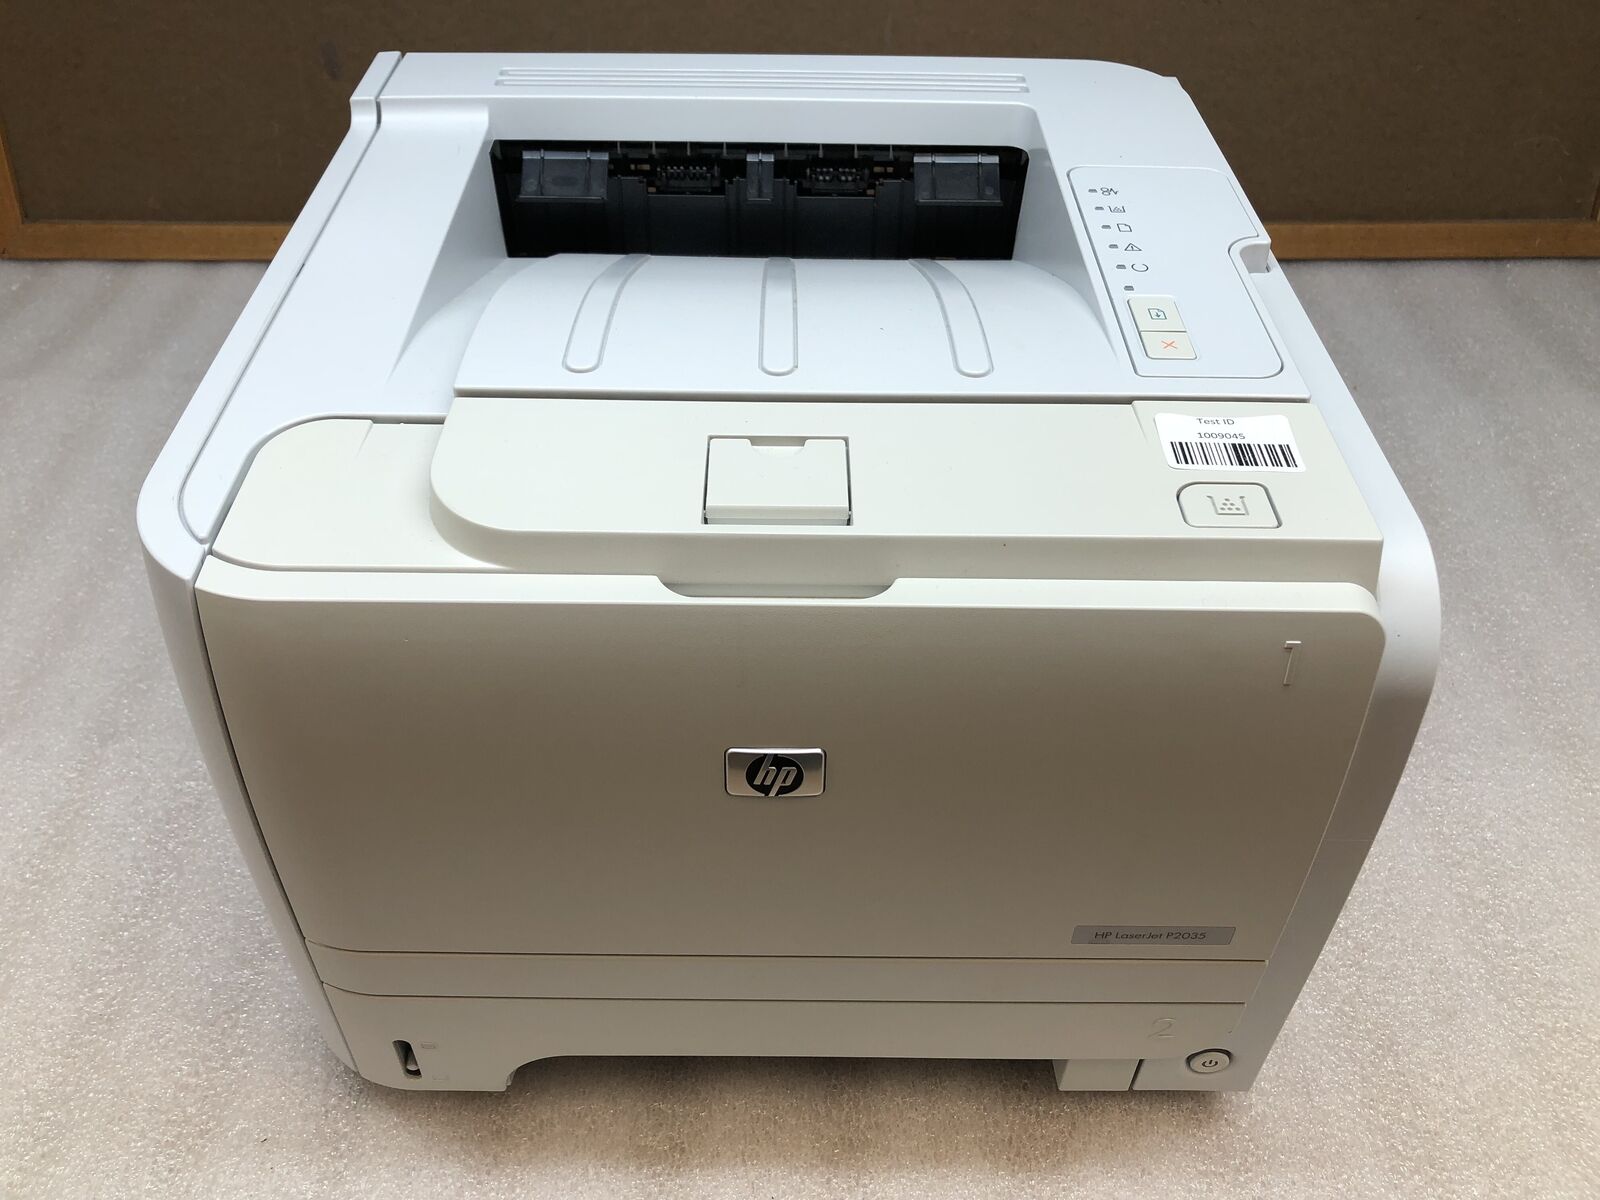 HP LaserJet P2035 CE461A Network Mono Laser Printer with TONER, 5K Pgs TESTED